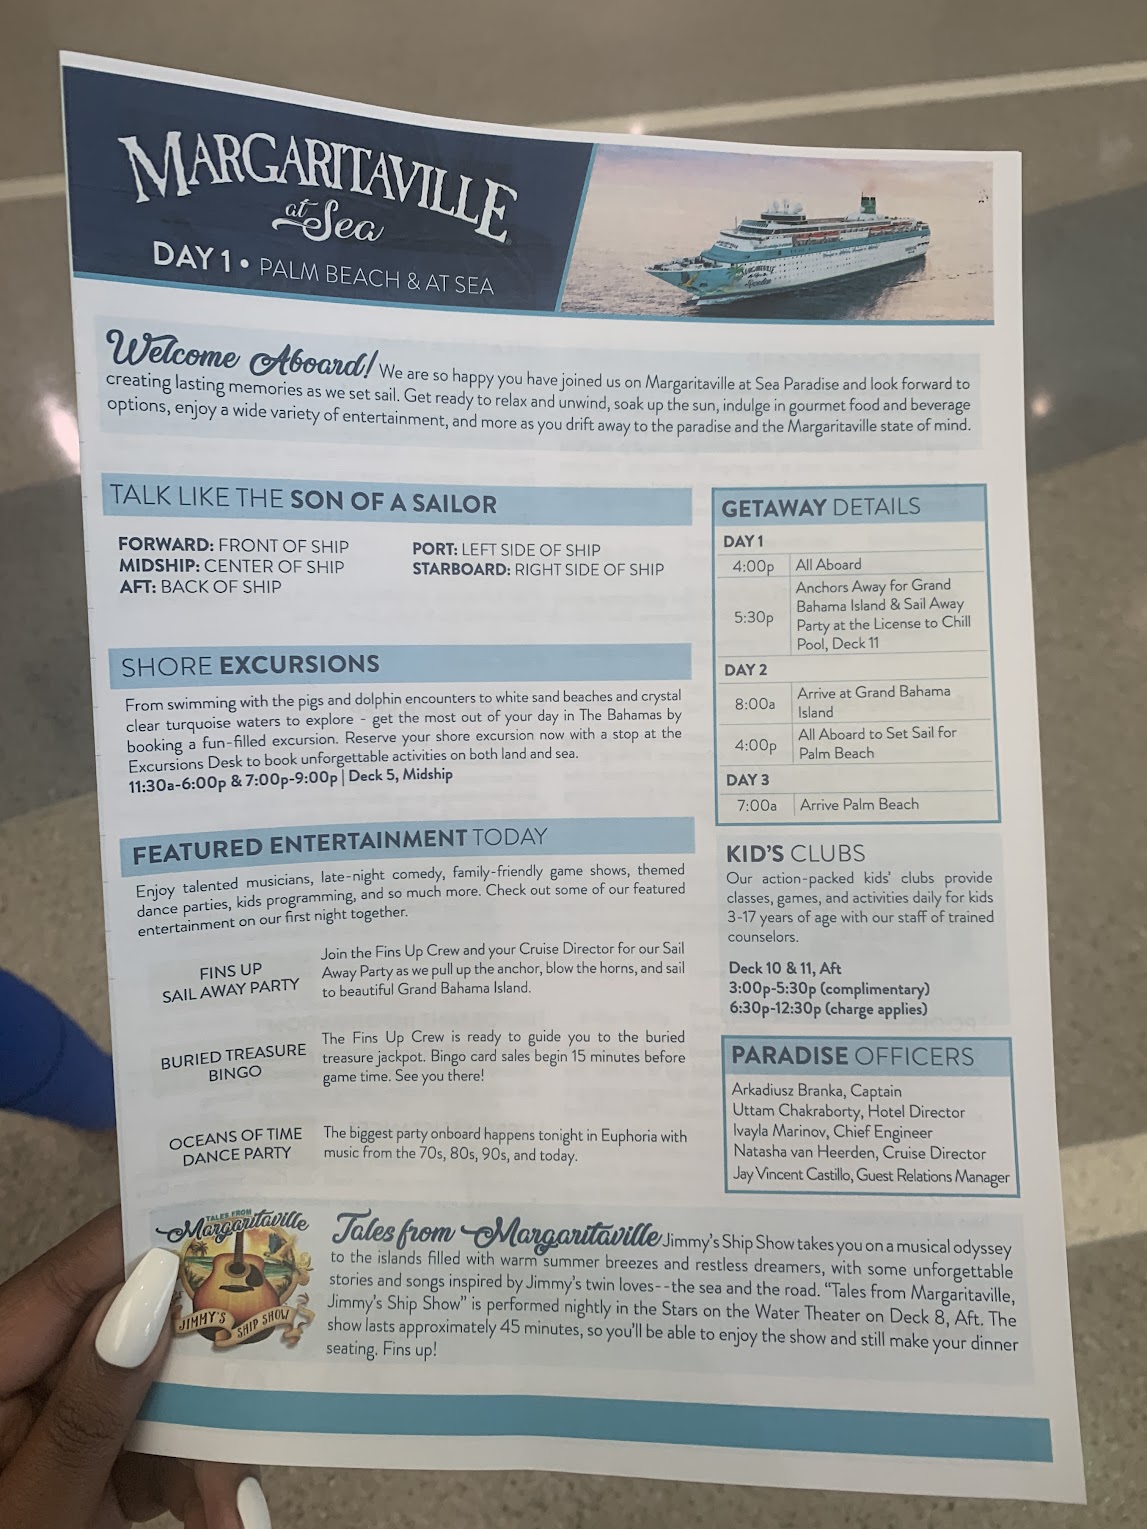 A Margaritaville at Sea cruise itinerary